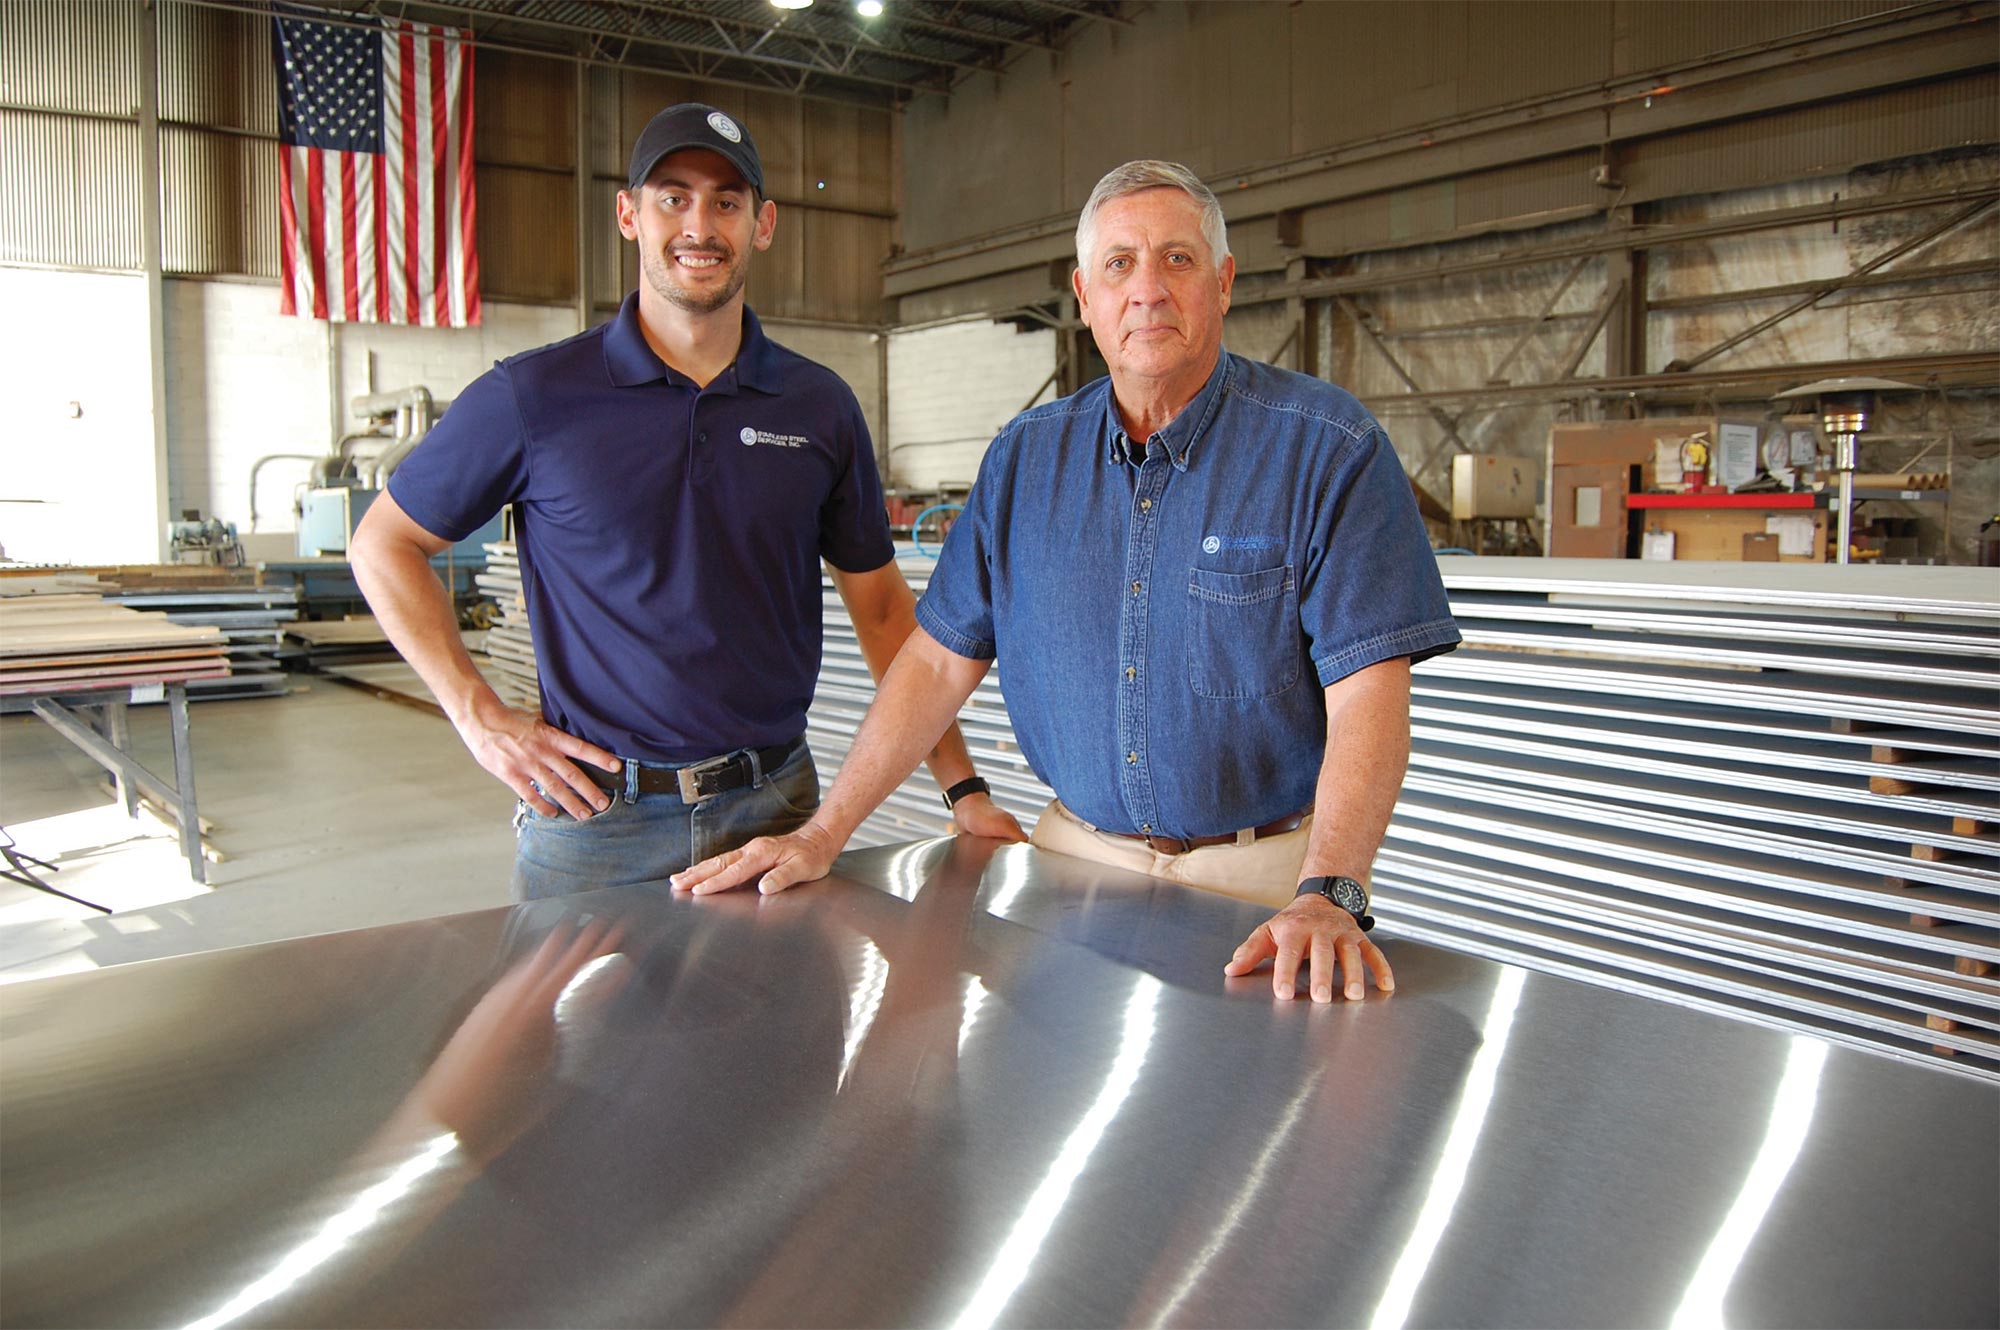 Rick Stewart and his team at Stainless Steel Services